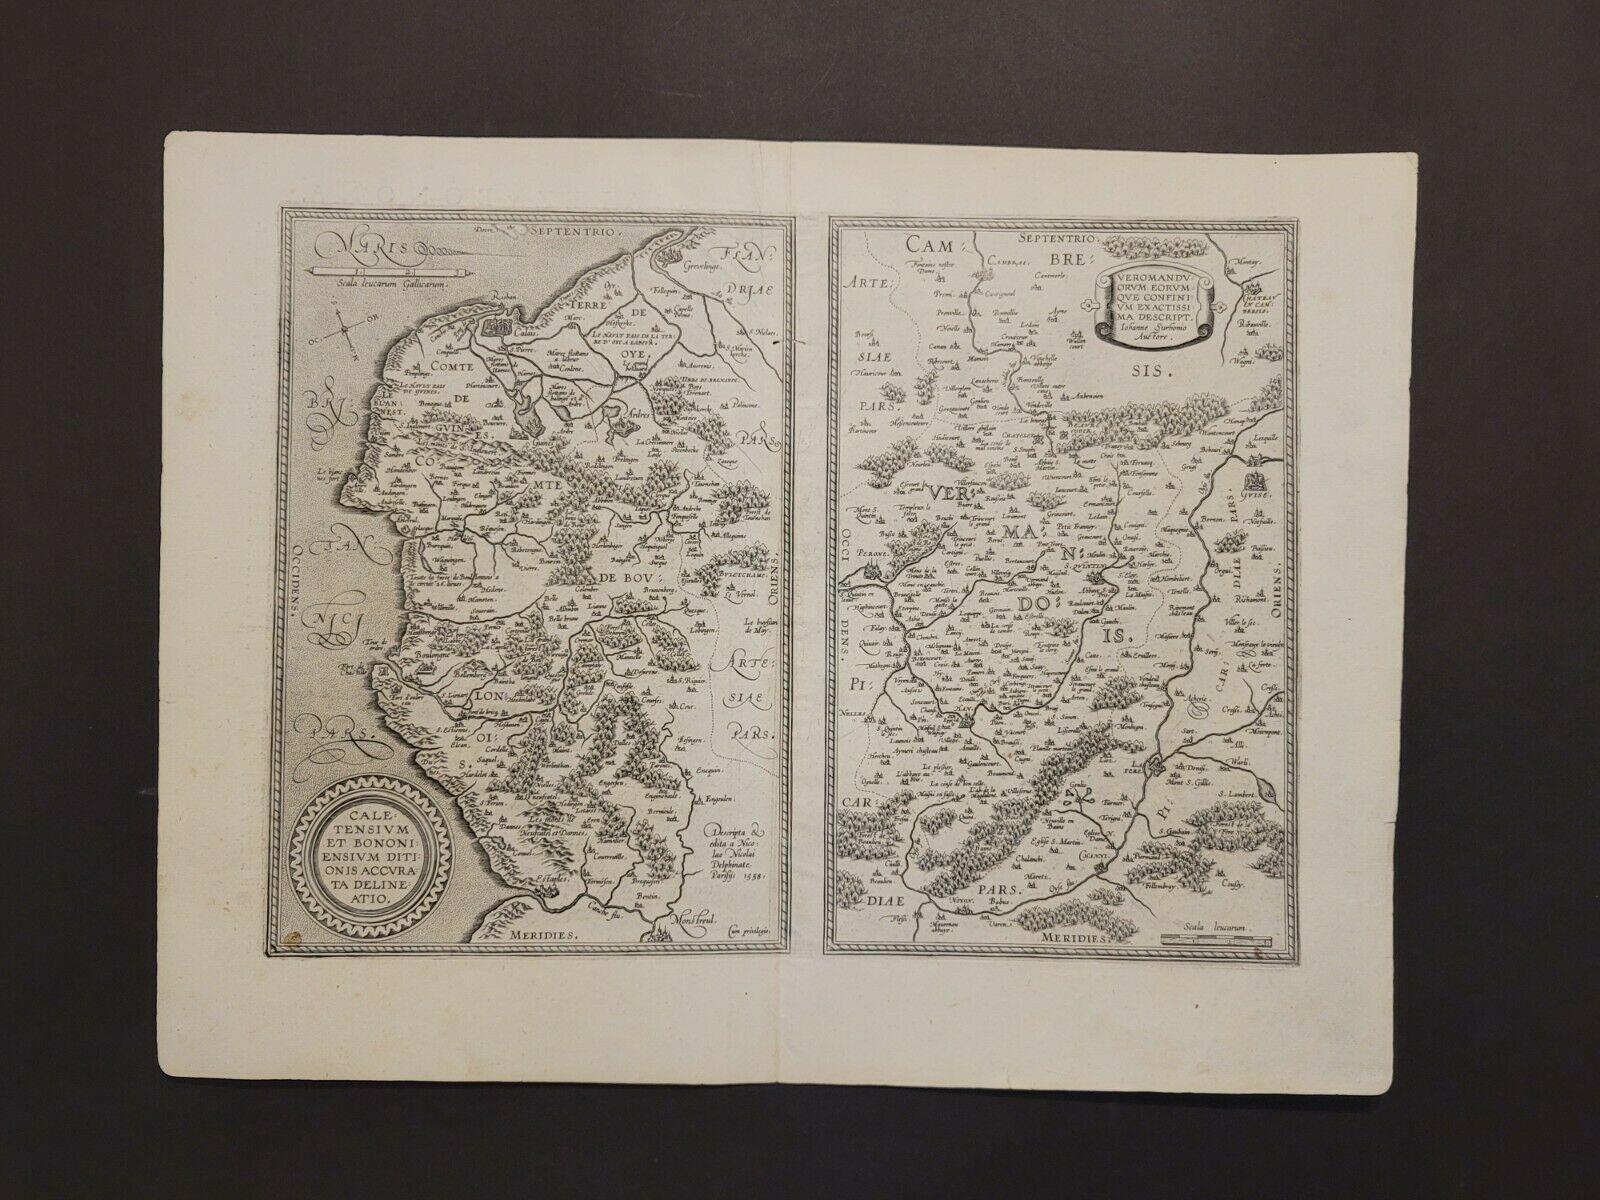 1590 Ortelius map of 
Calais and Vermandois, France and Vicinity 
Ric.a014

Two rare regional Abraham Ortelius maps on a single folio sheet. Left map, entitled Caletensium, depicts the French and Belgian coastline from Estables to Calais.